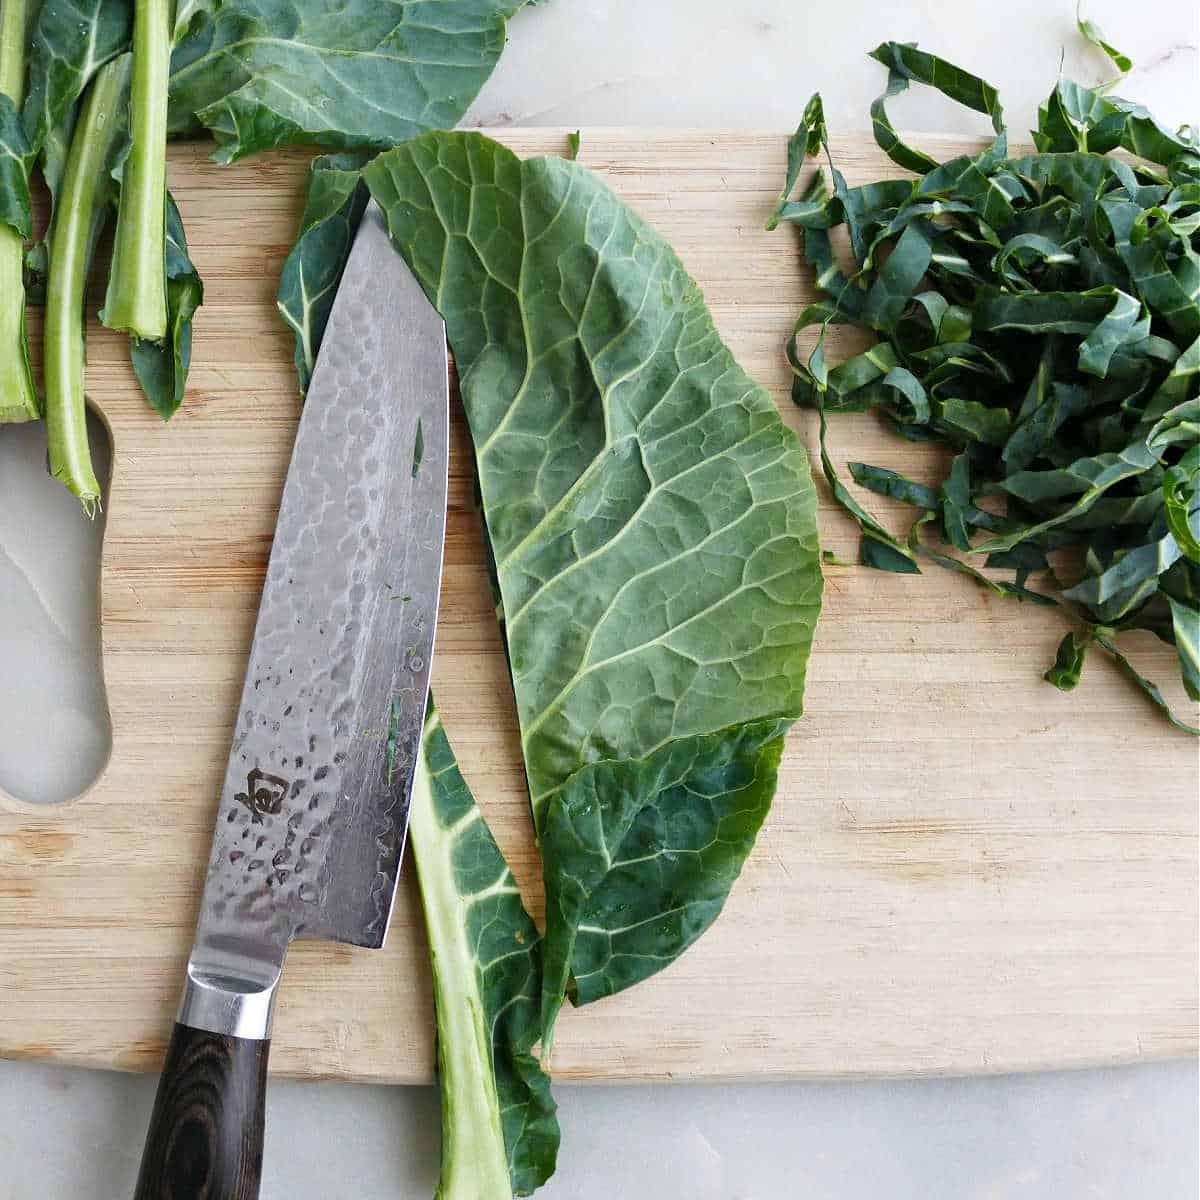 stems of collard greens being sliced off on a cutting board